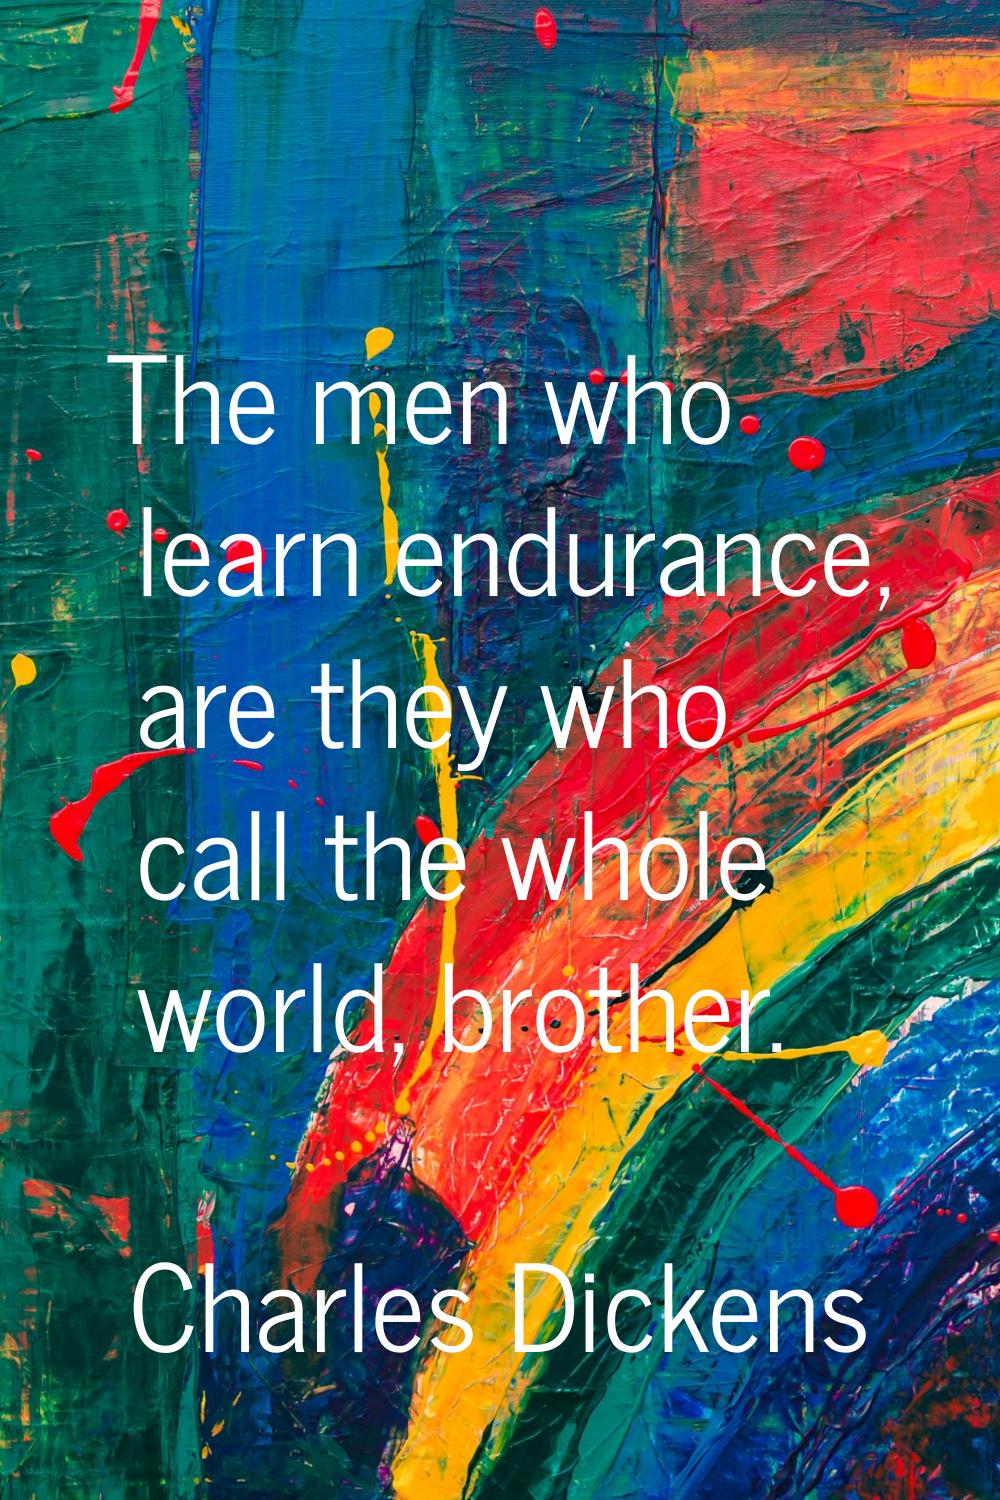 The men who learn endurance, are they who call the whole world, brother.